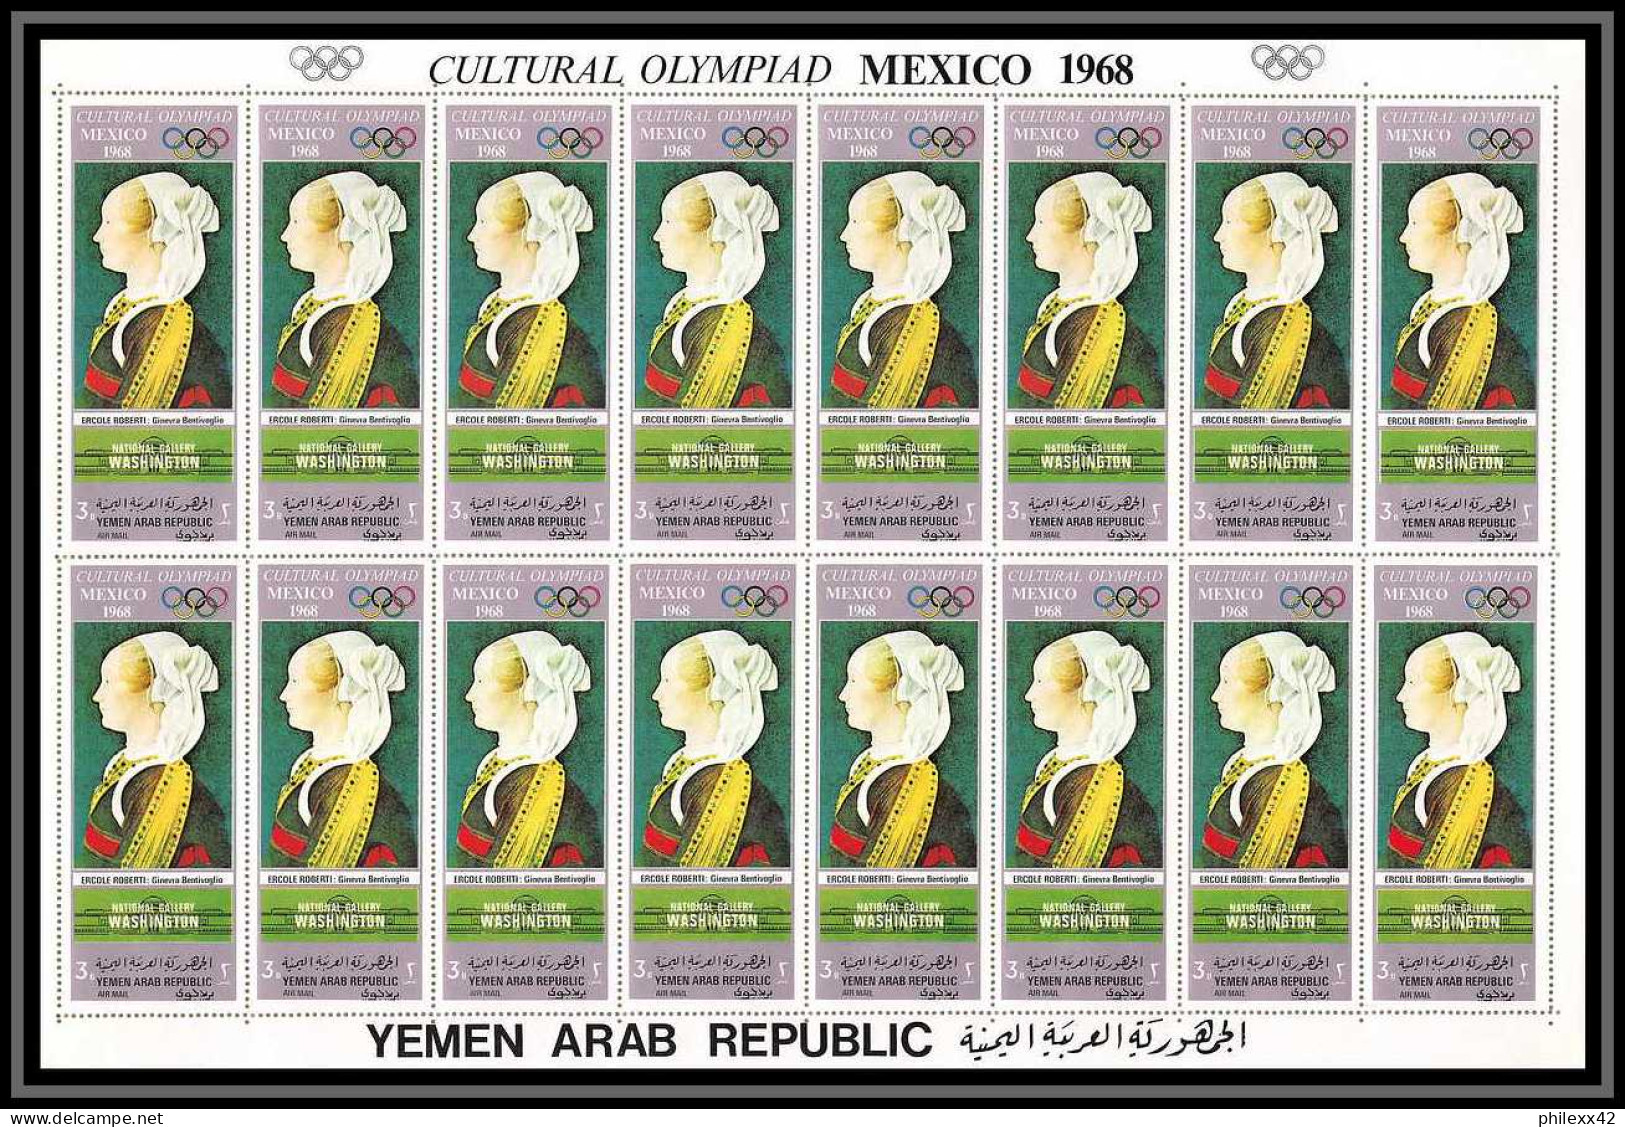 163d YAR (nord yemen) MNH ** N° 998 / 1003 A jeux olympiques (olympic games) MEXICO (tableaux painting) feuilles sheets